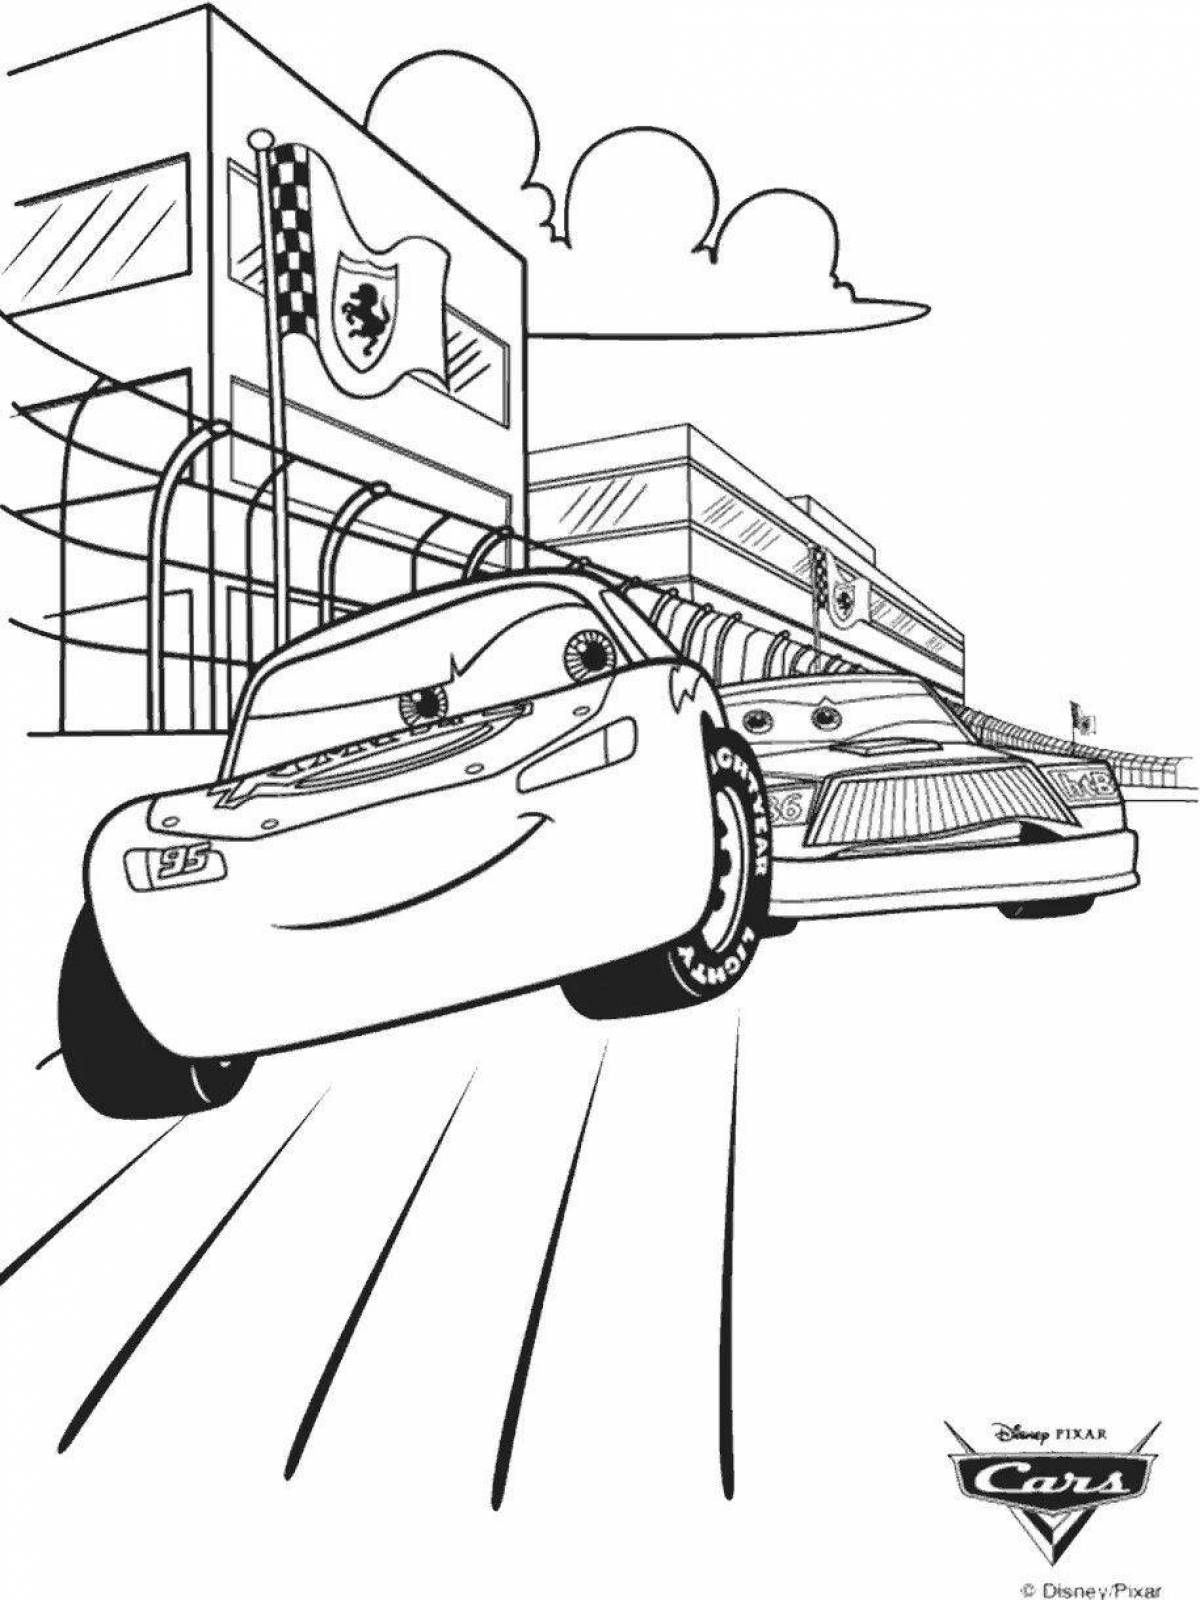 Chico's shiny coloring page